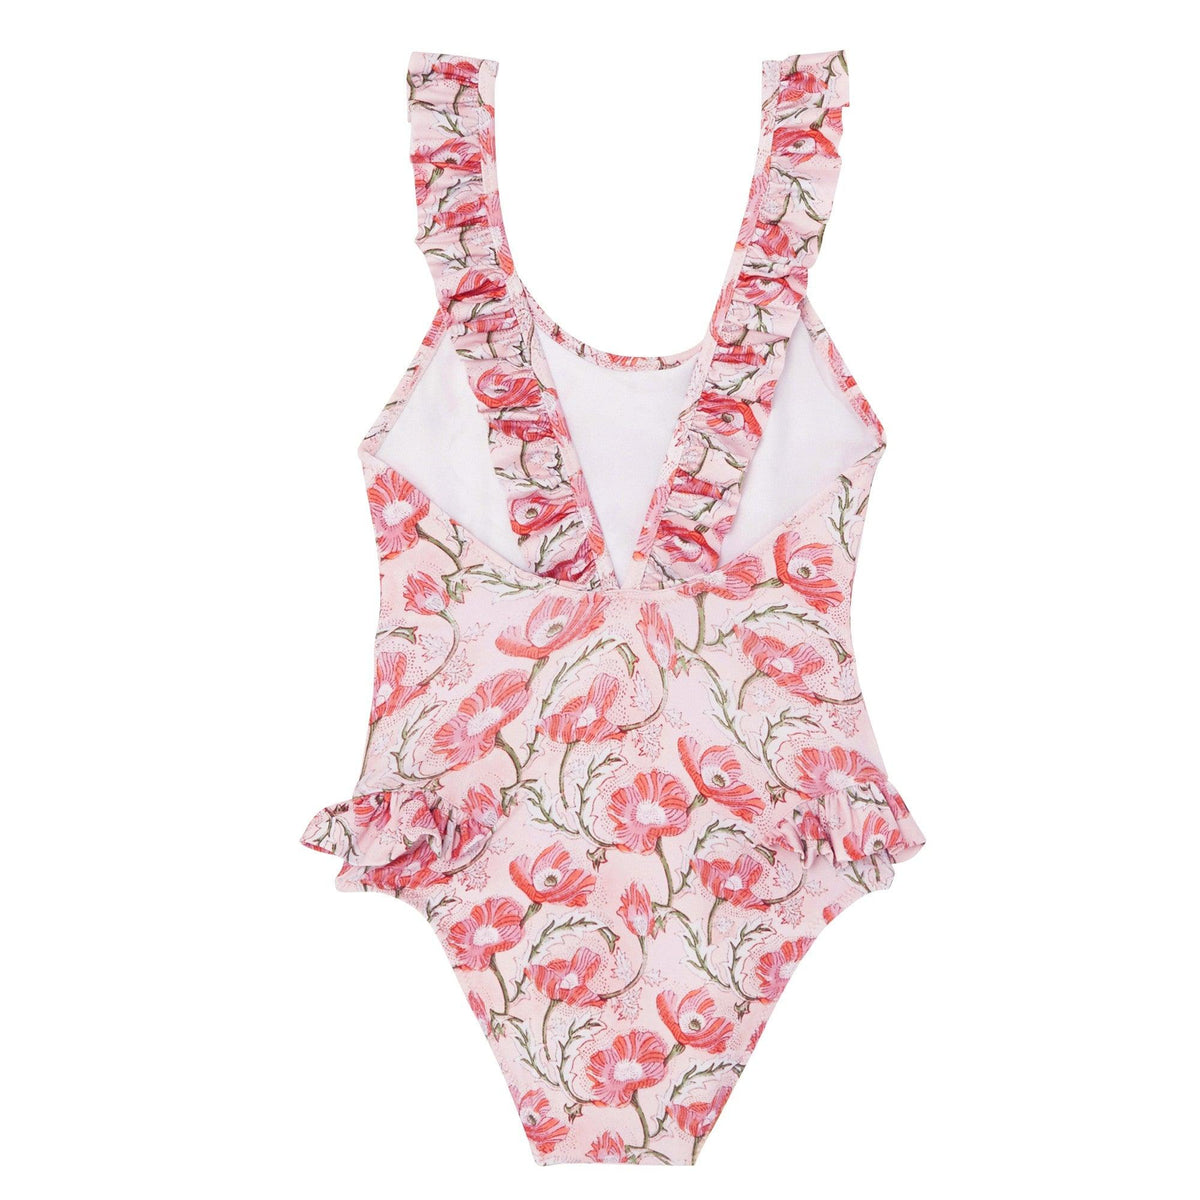 One piece swimsuit for girls, lovely indian floral print